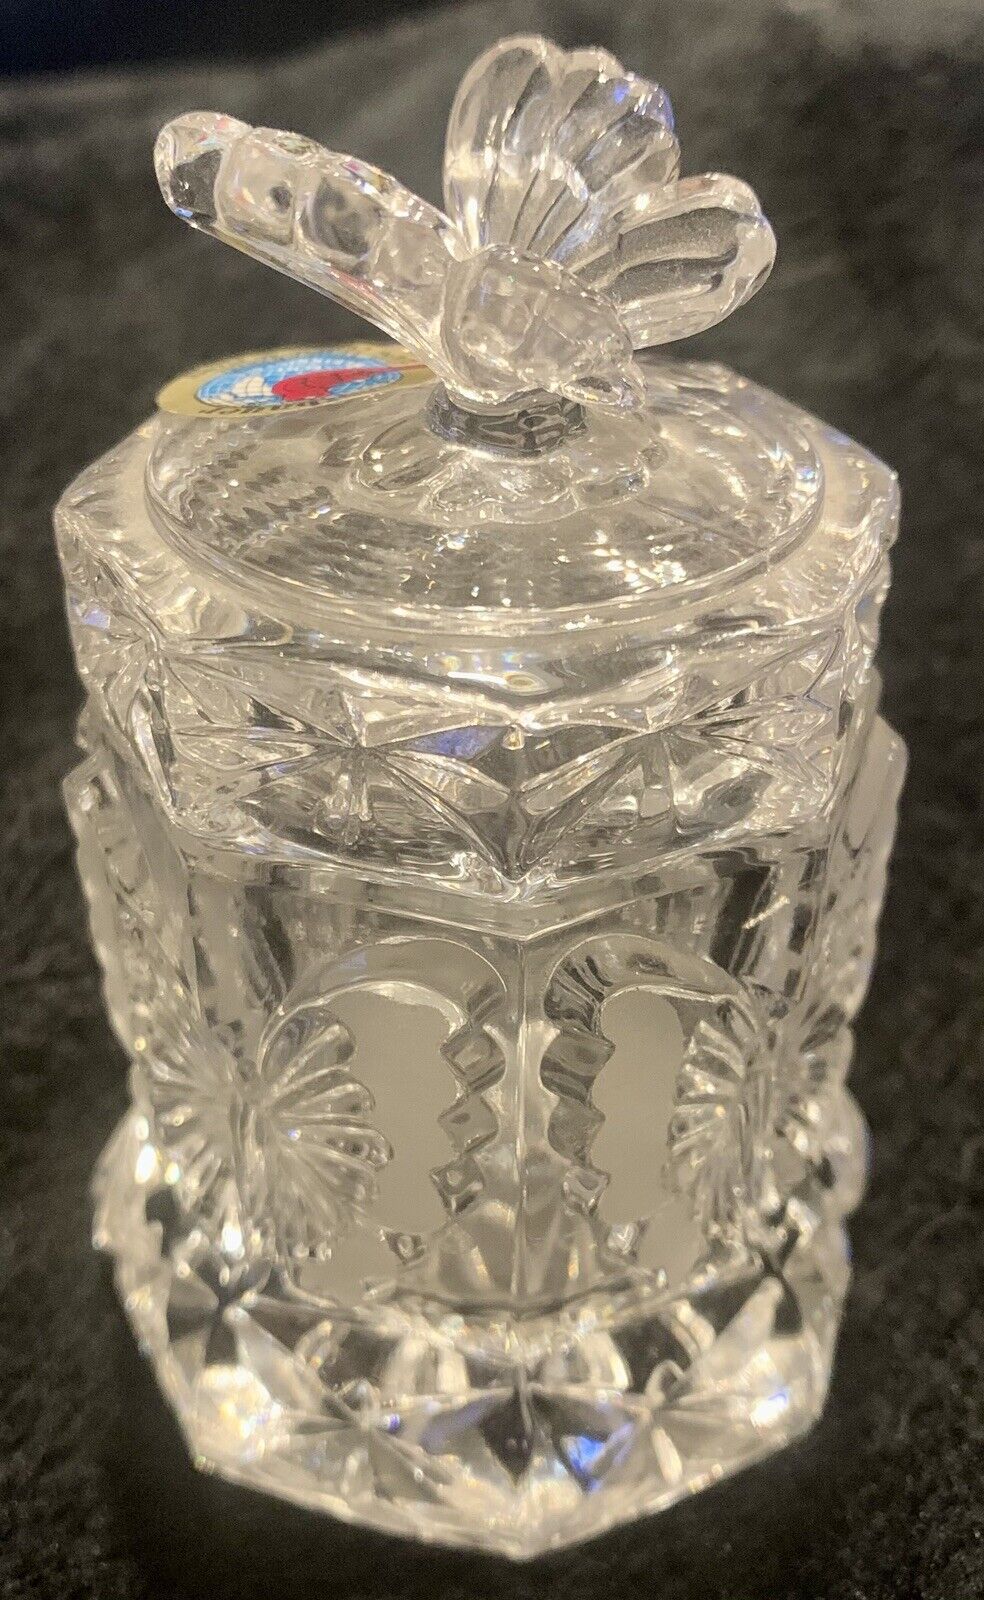 Hofbauer beautiful crystal butterfly trinket box (made in Germany)